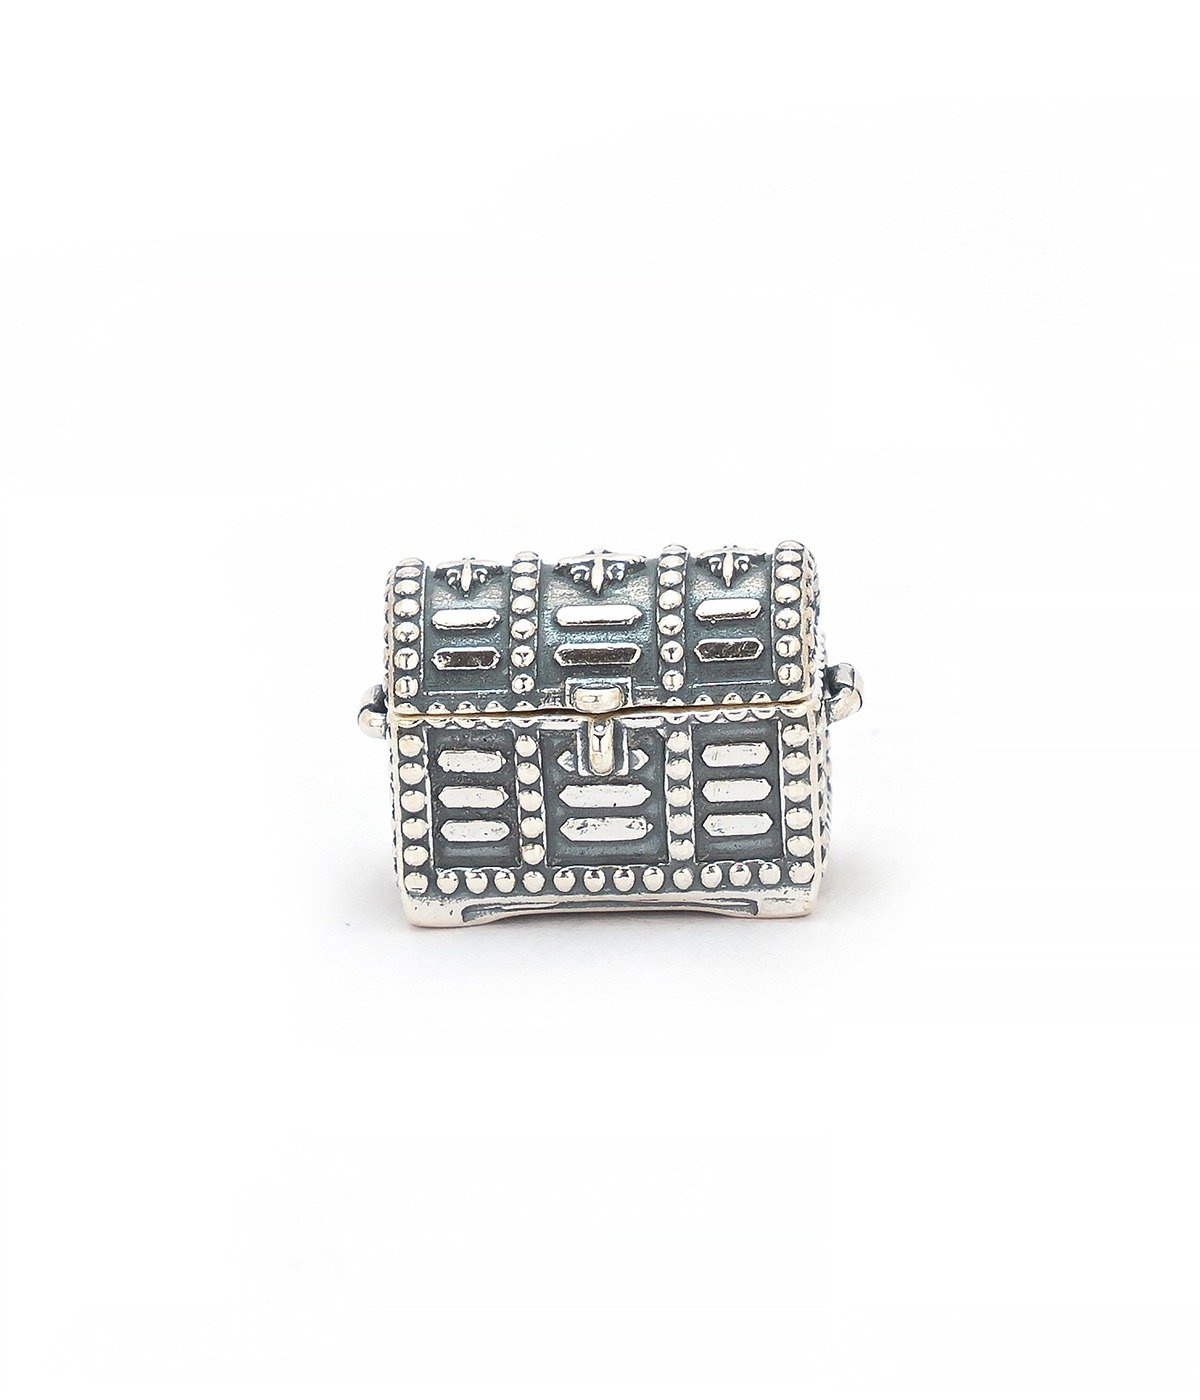 92.5 STERLING SILVER  MINIATURE TRESSURE BOX FOR GIFT